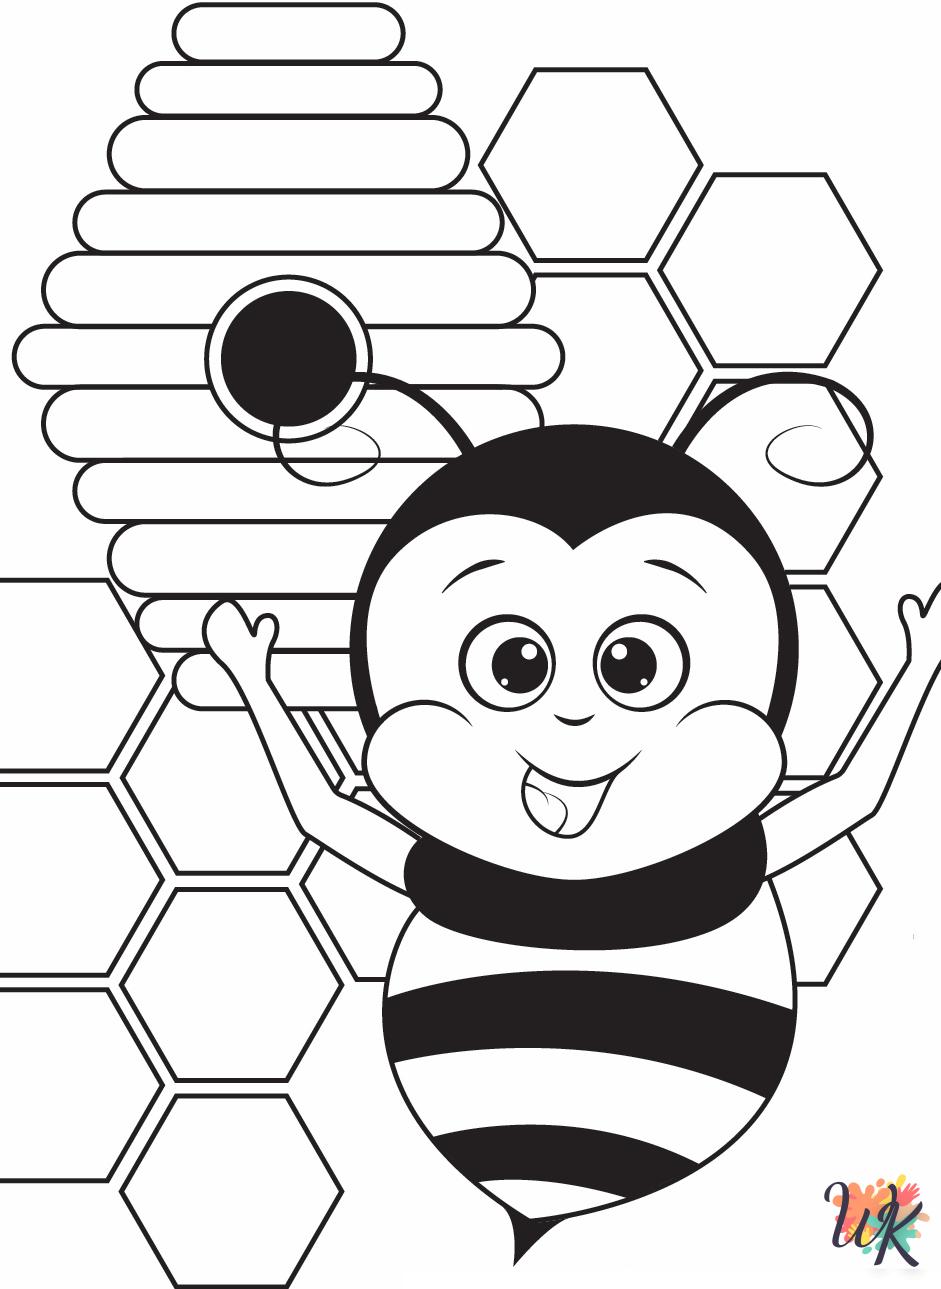 Bee coloring pages easy